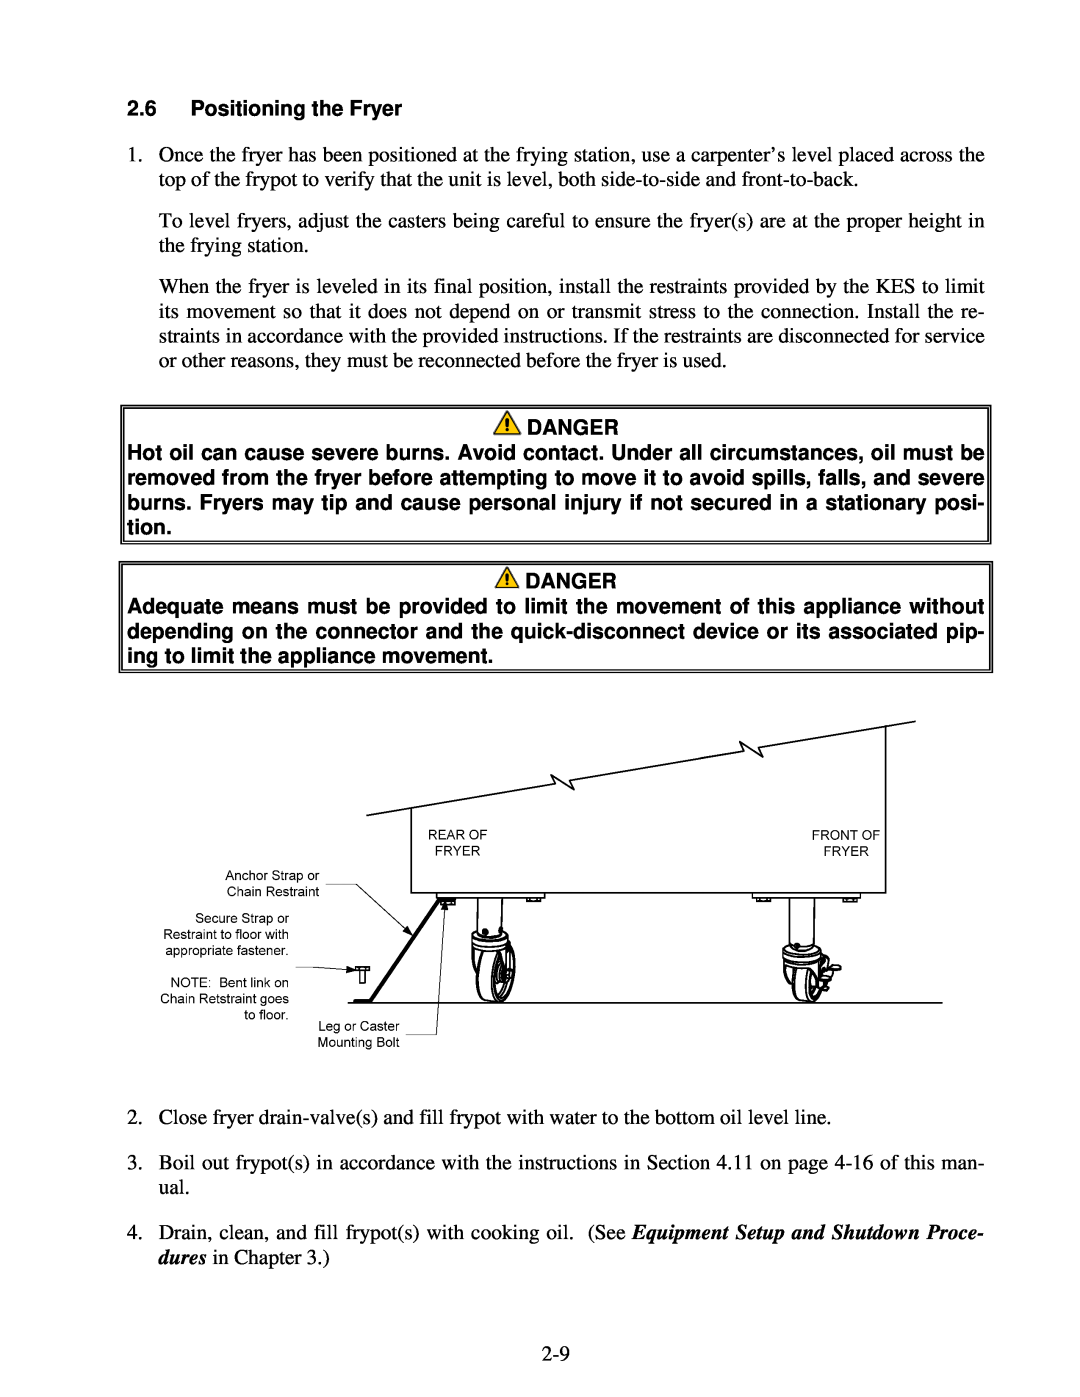 Frymaster Protector Series operation manual 2.6Positioning the Fryer, Danger 